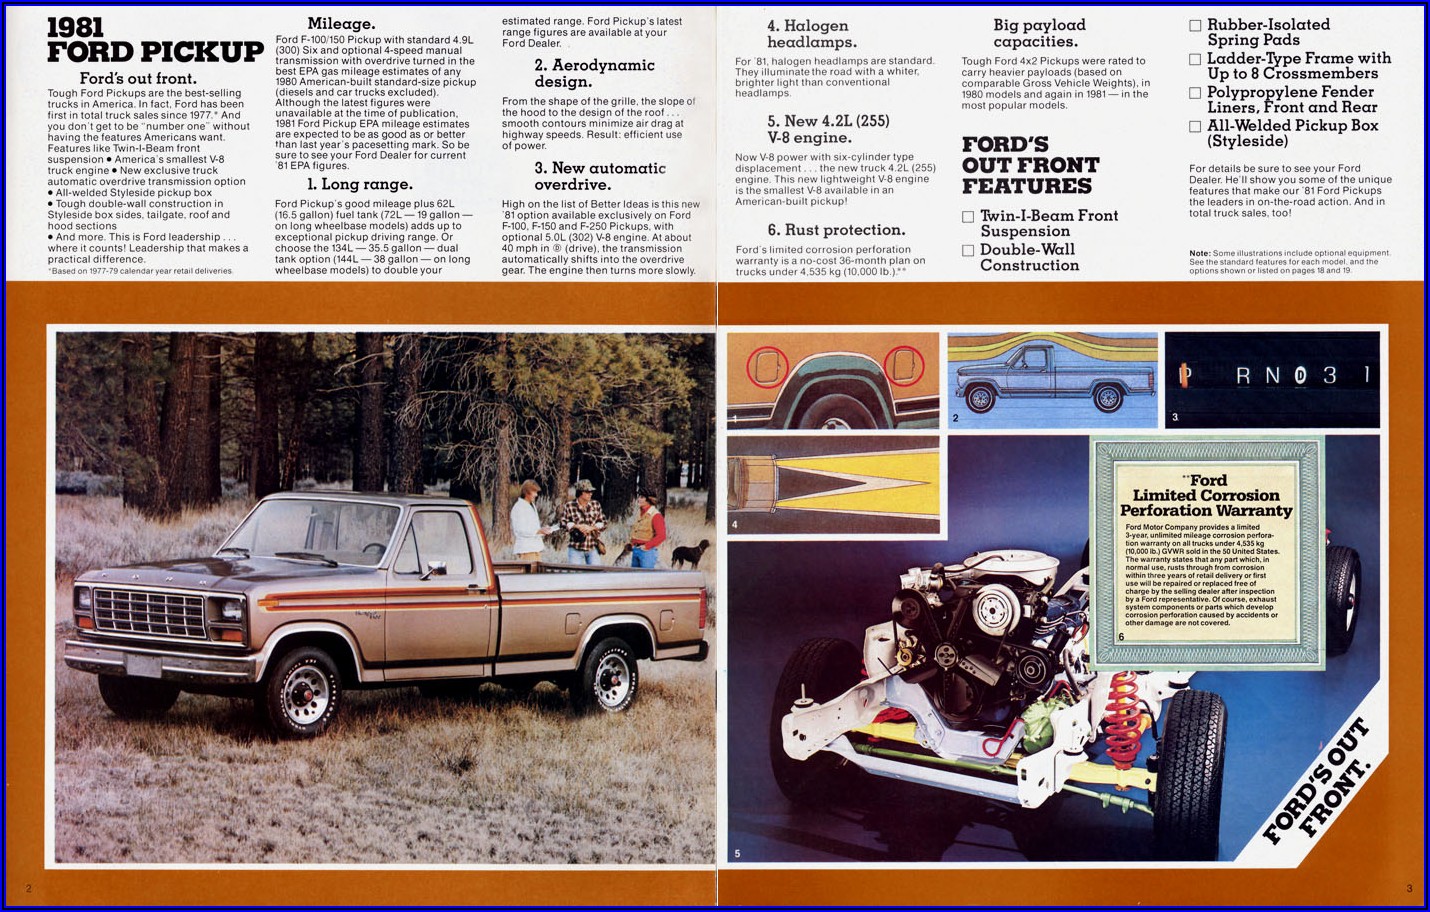 Ford Limited Maintenance Plan Brochure